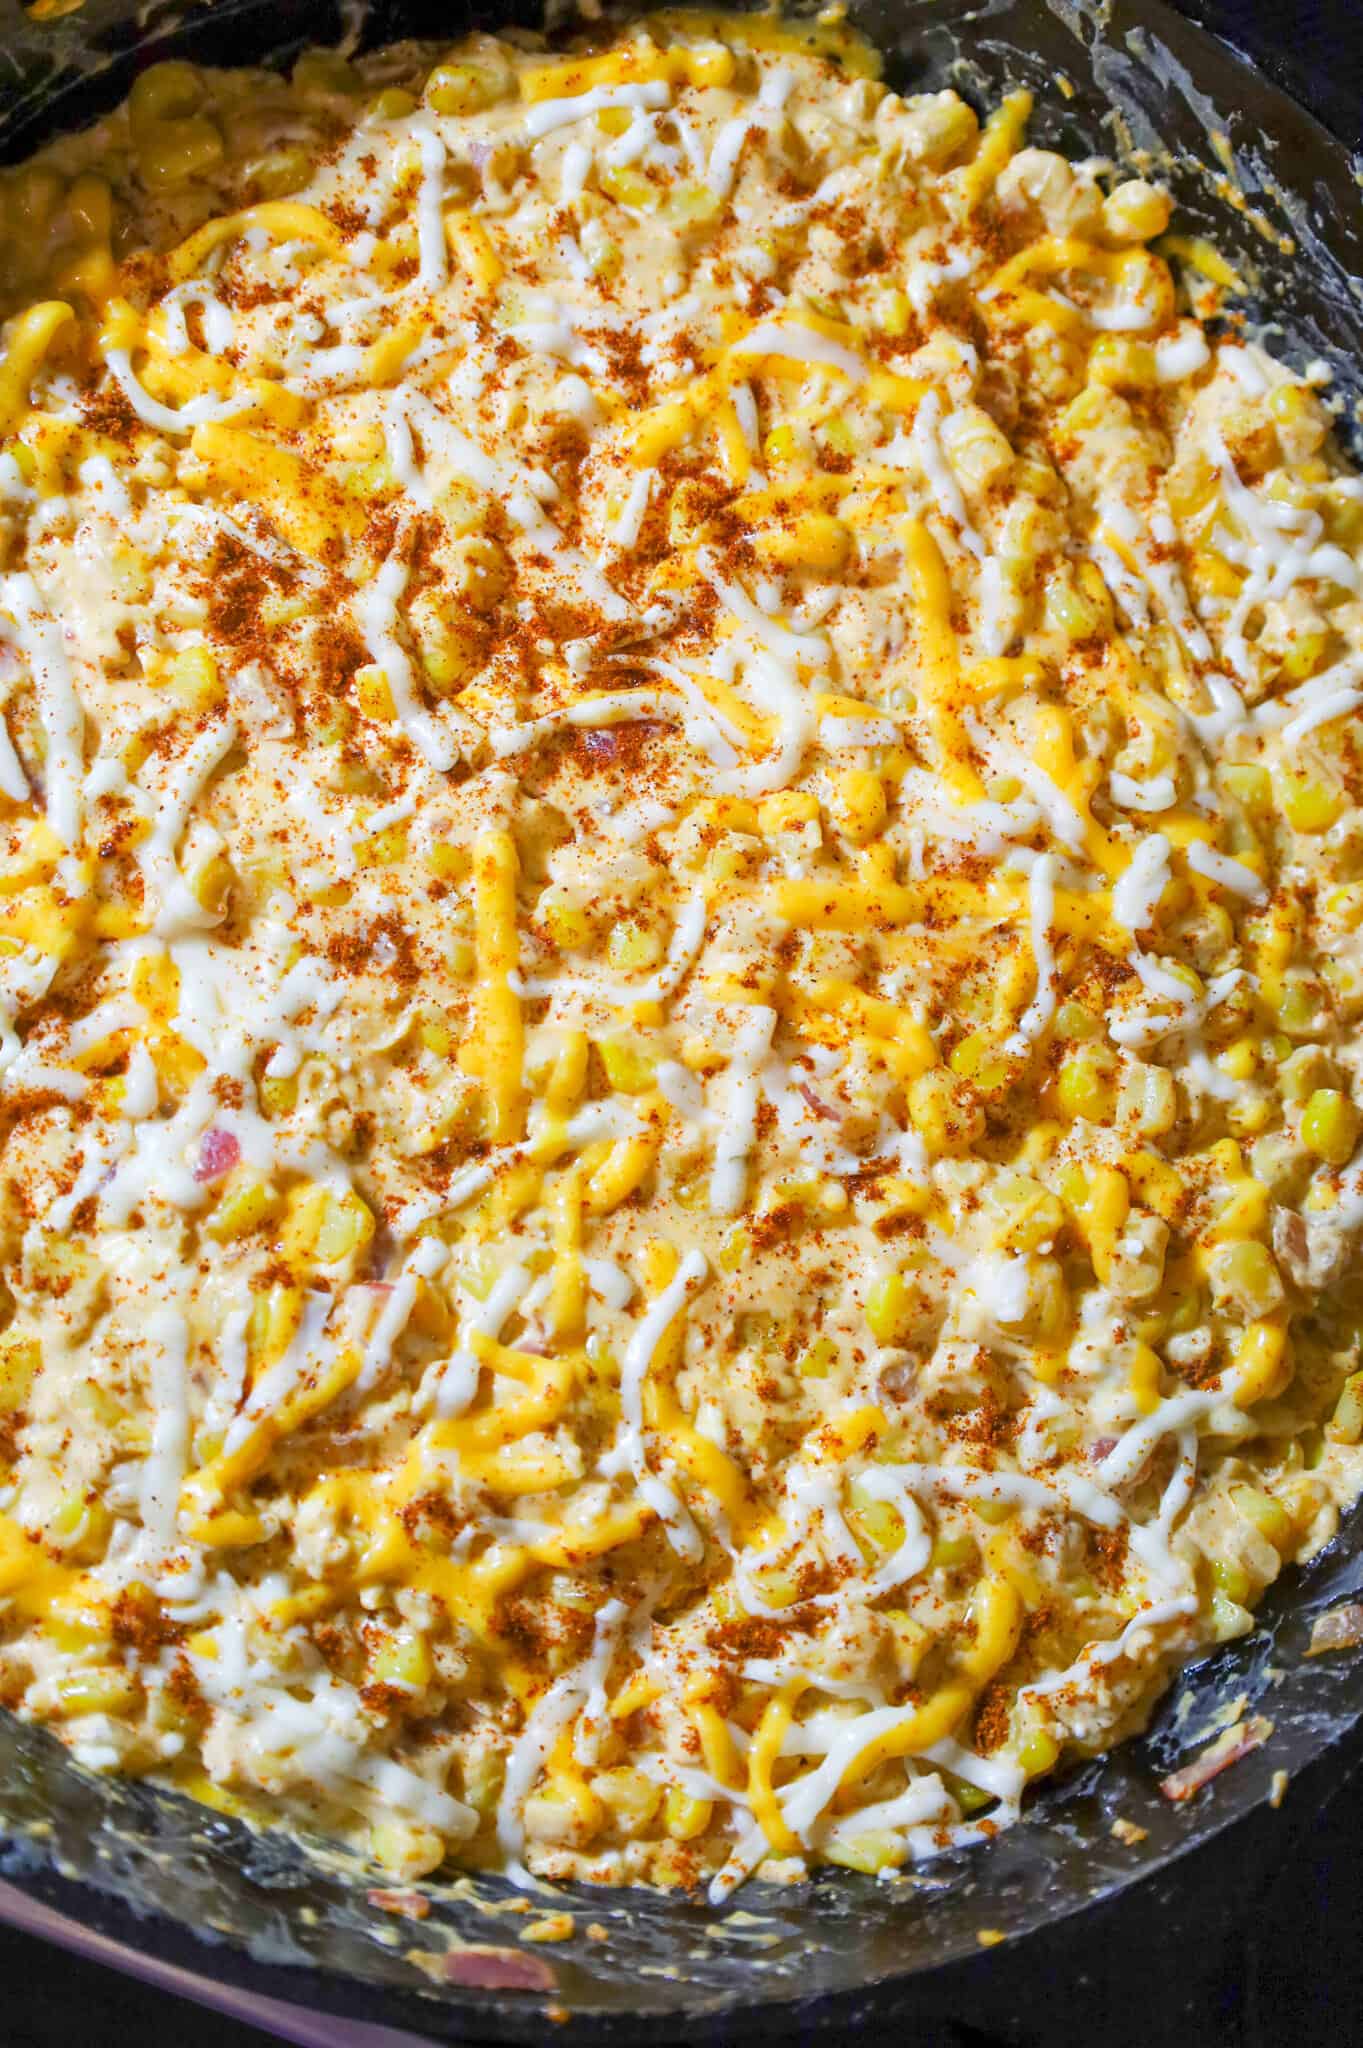 shredded cheese and chili powder on top of creamy corn mixture in a skillet